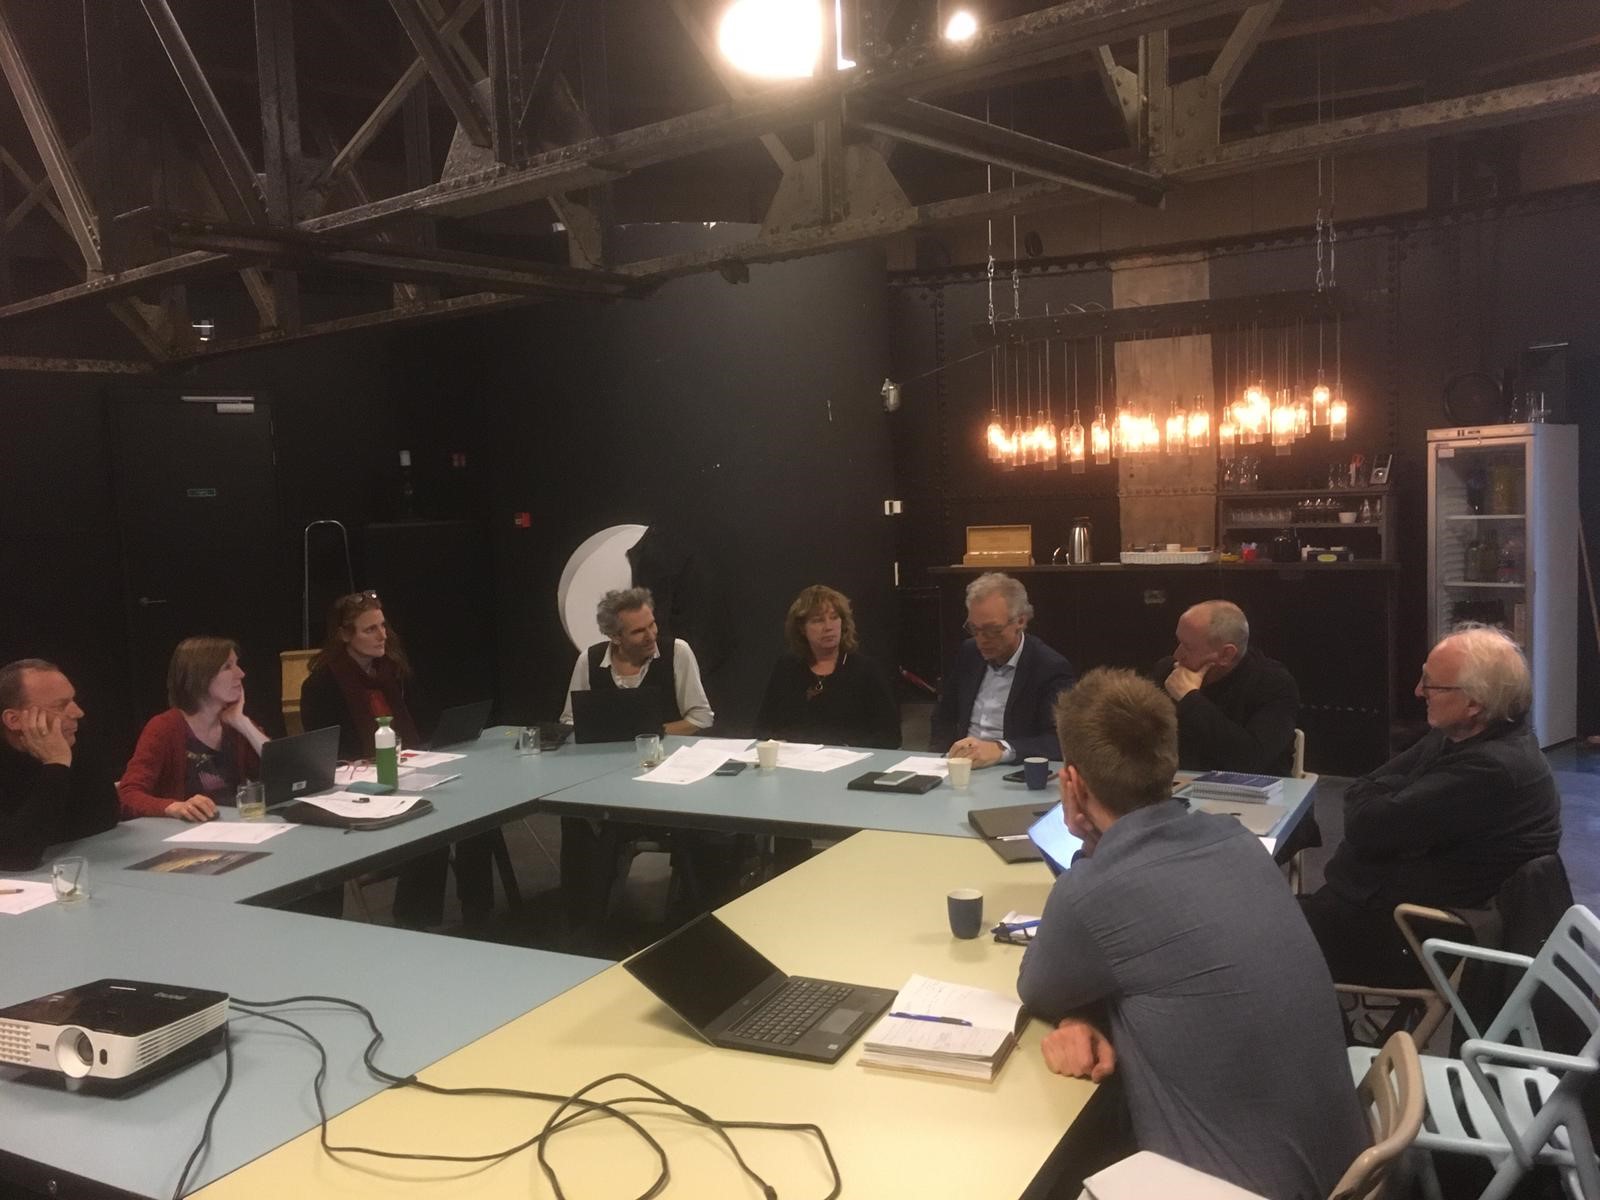 The 3rd meeting of stakeholders in the Netherlands